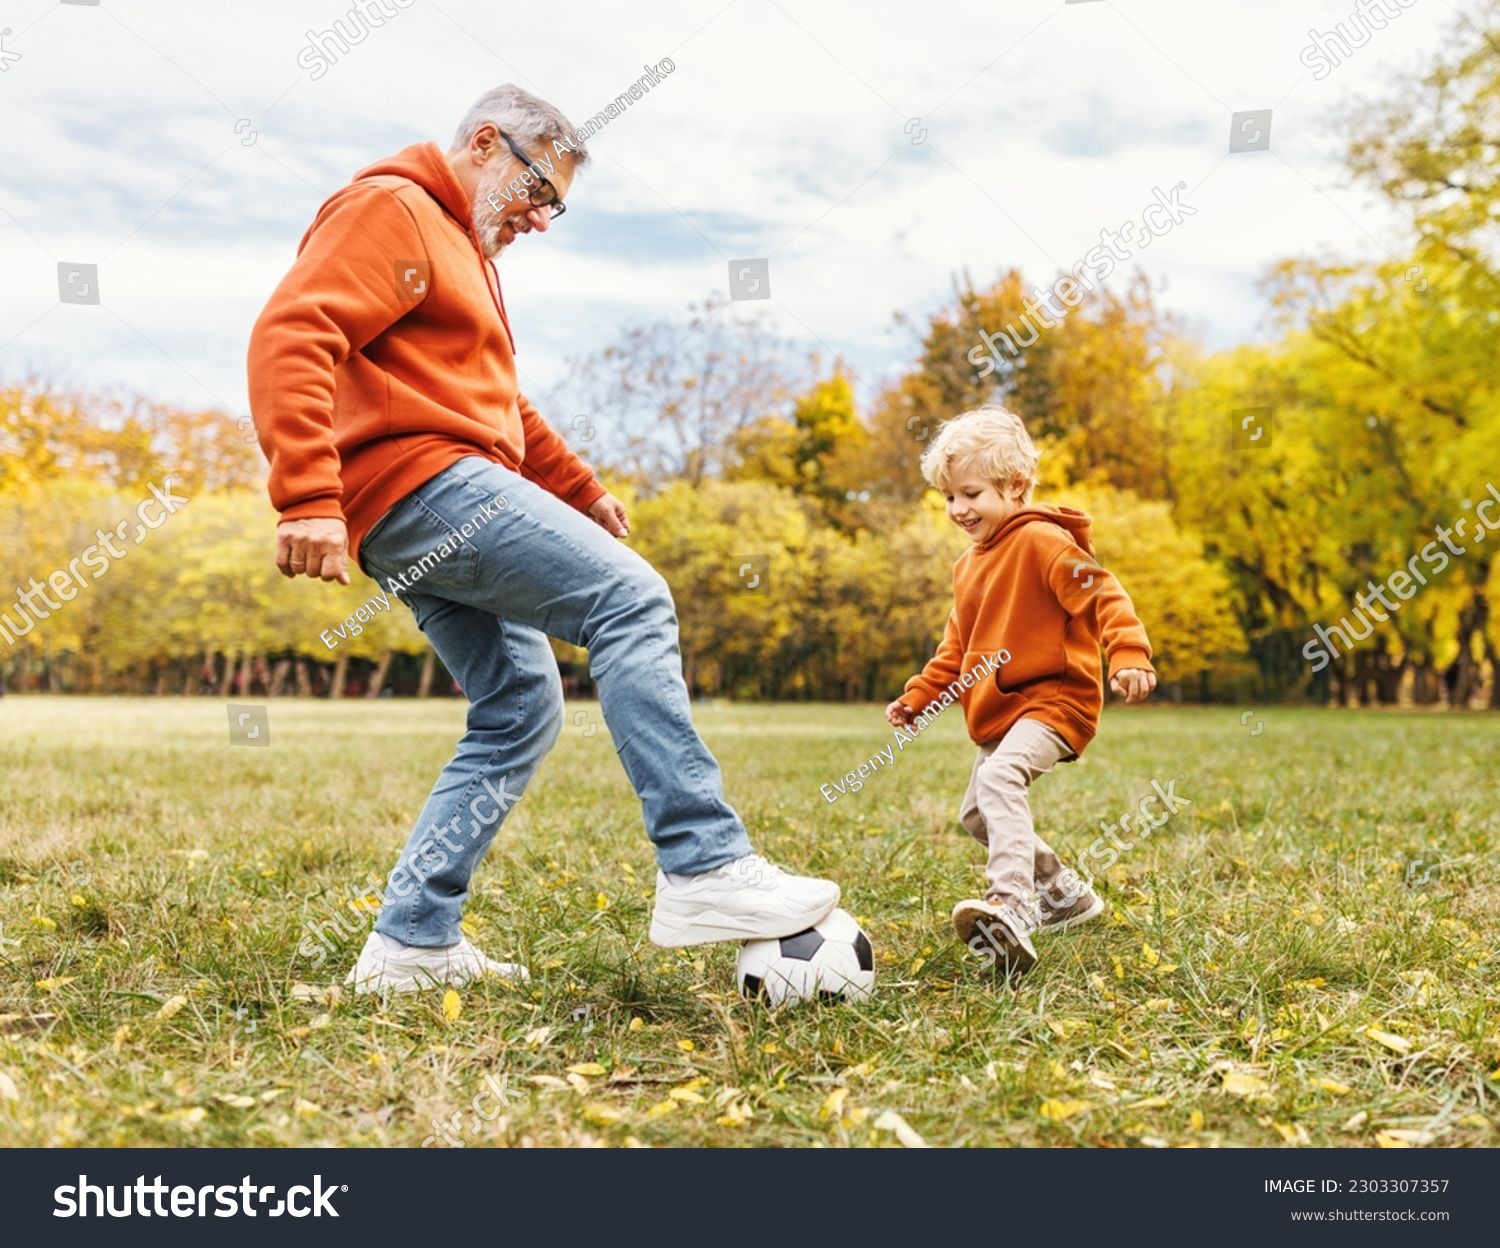 Happy family grandfather and grandson play football on lawn in the park
 #2303307357